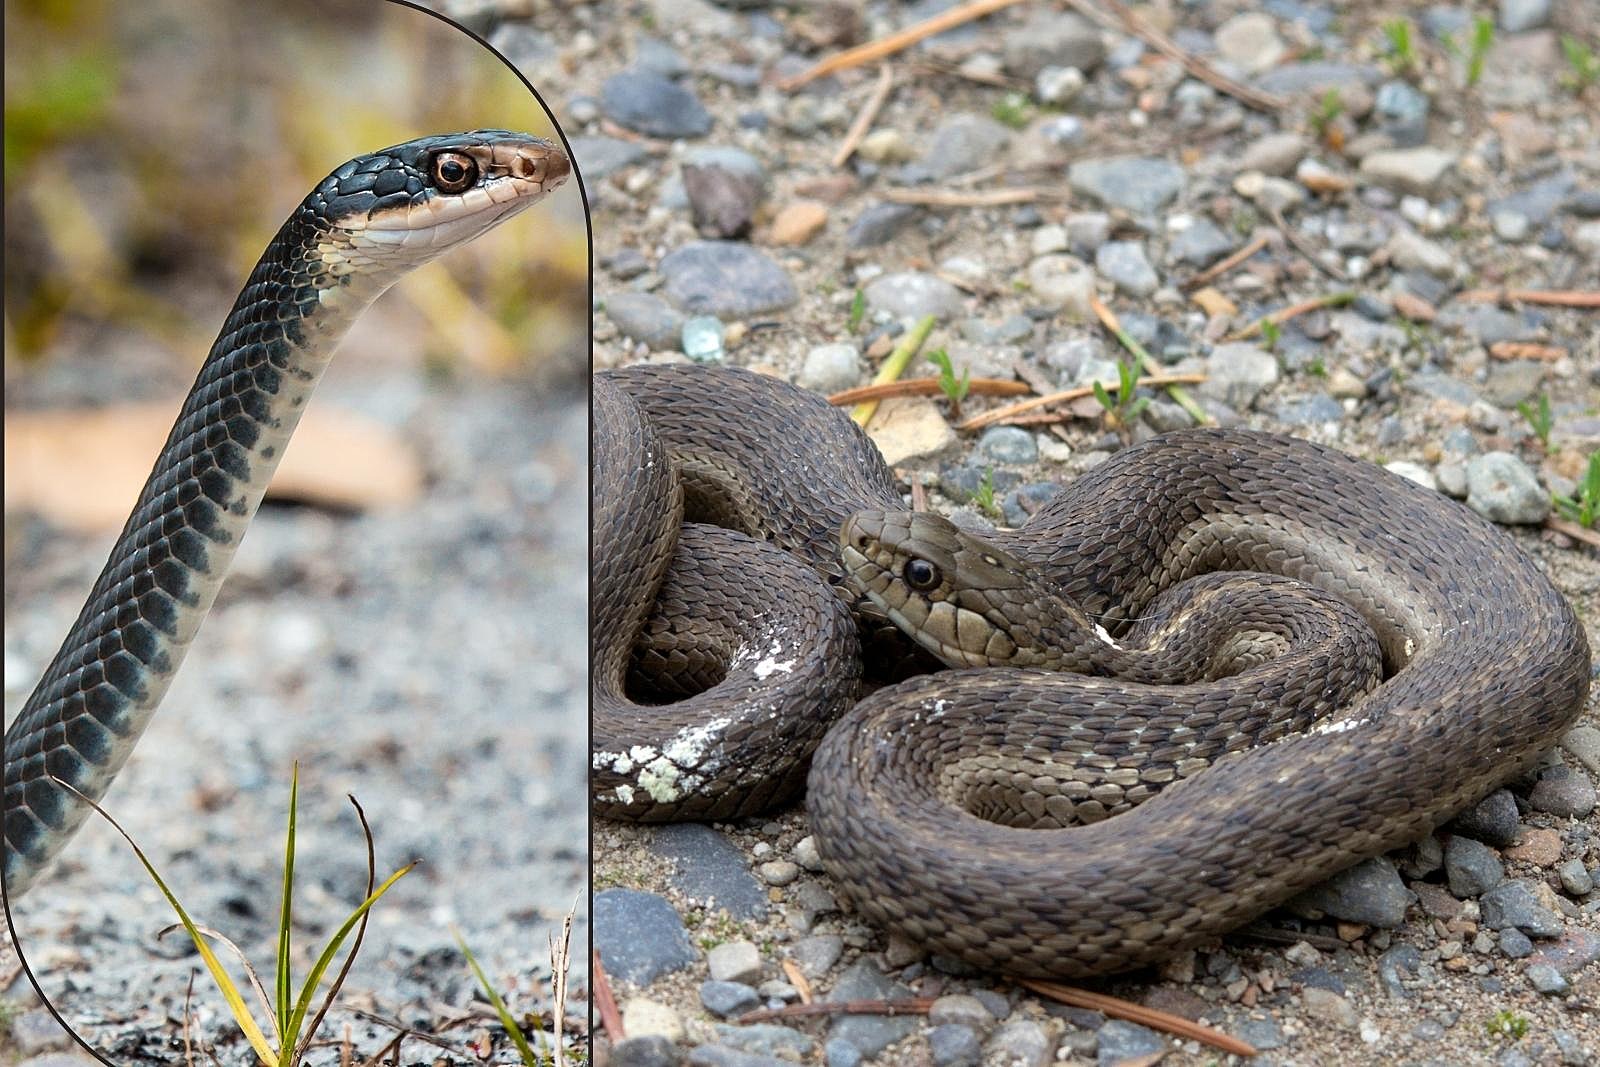 A racer snake coiled defensively on the right; on the left, one performing a periscope.